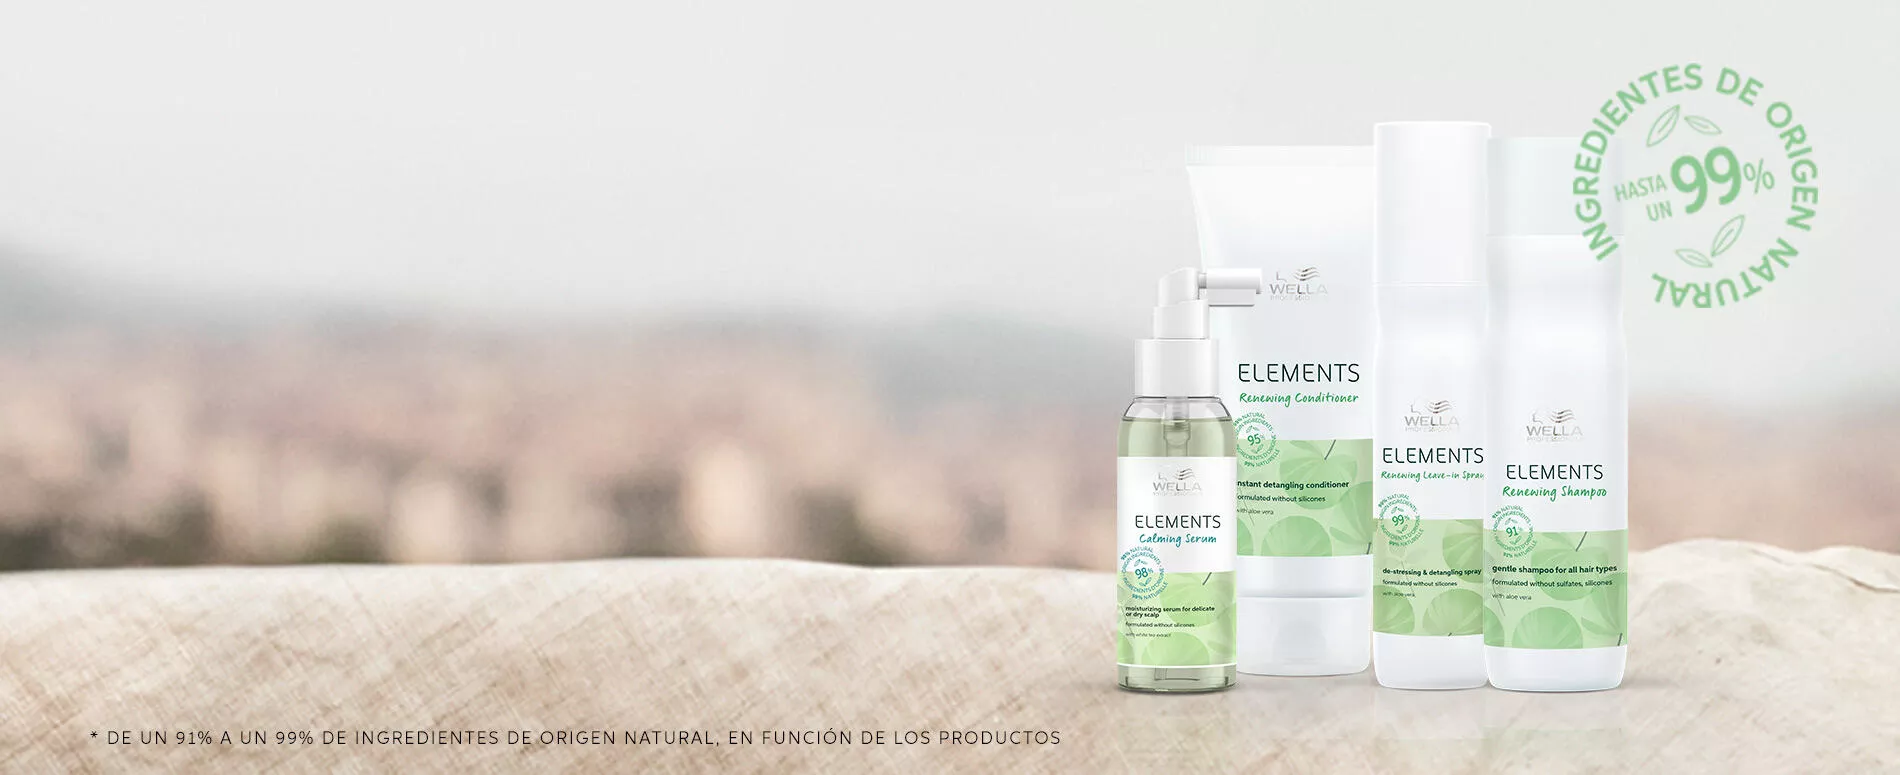 Banner for Wella Professionals new Elements hair and scalp care collection with natural origin ingredients